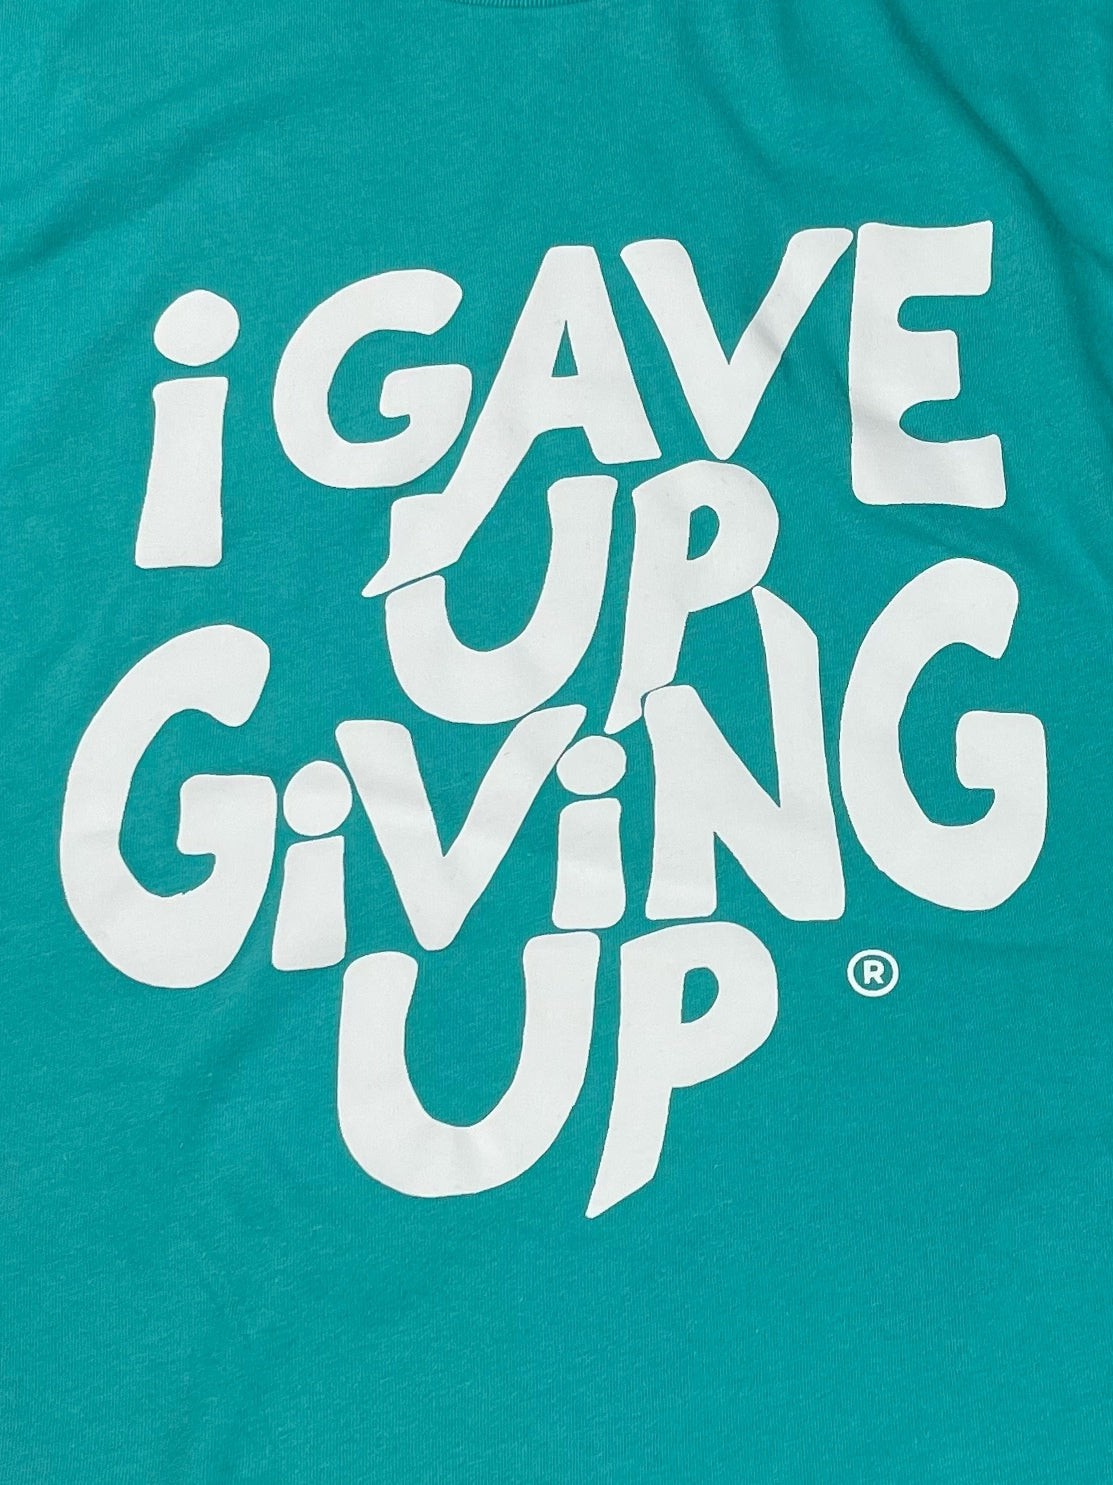 I Gave Up Giving Up® T-Shirt (Hydrate / White)